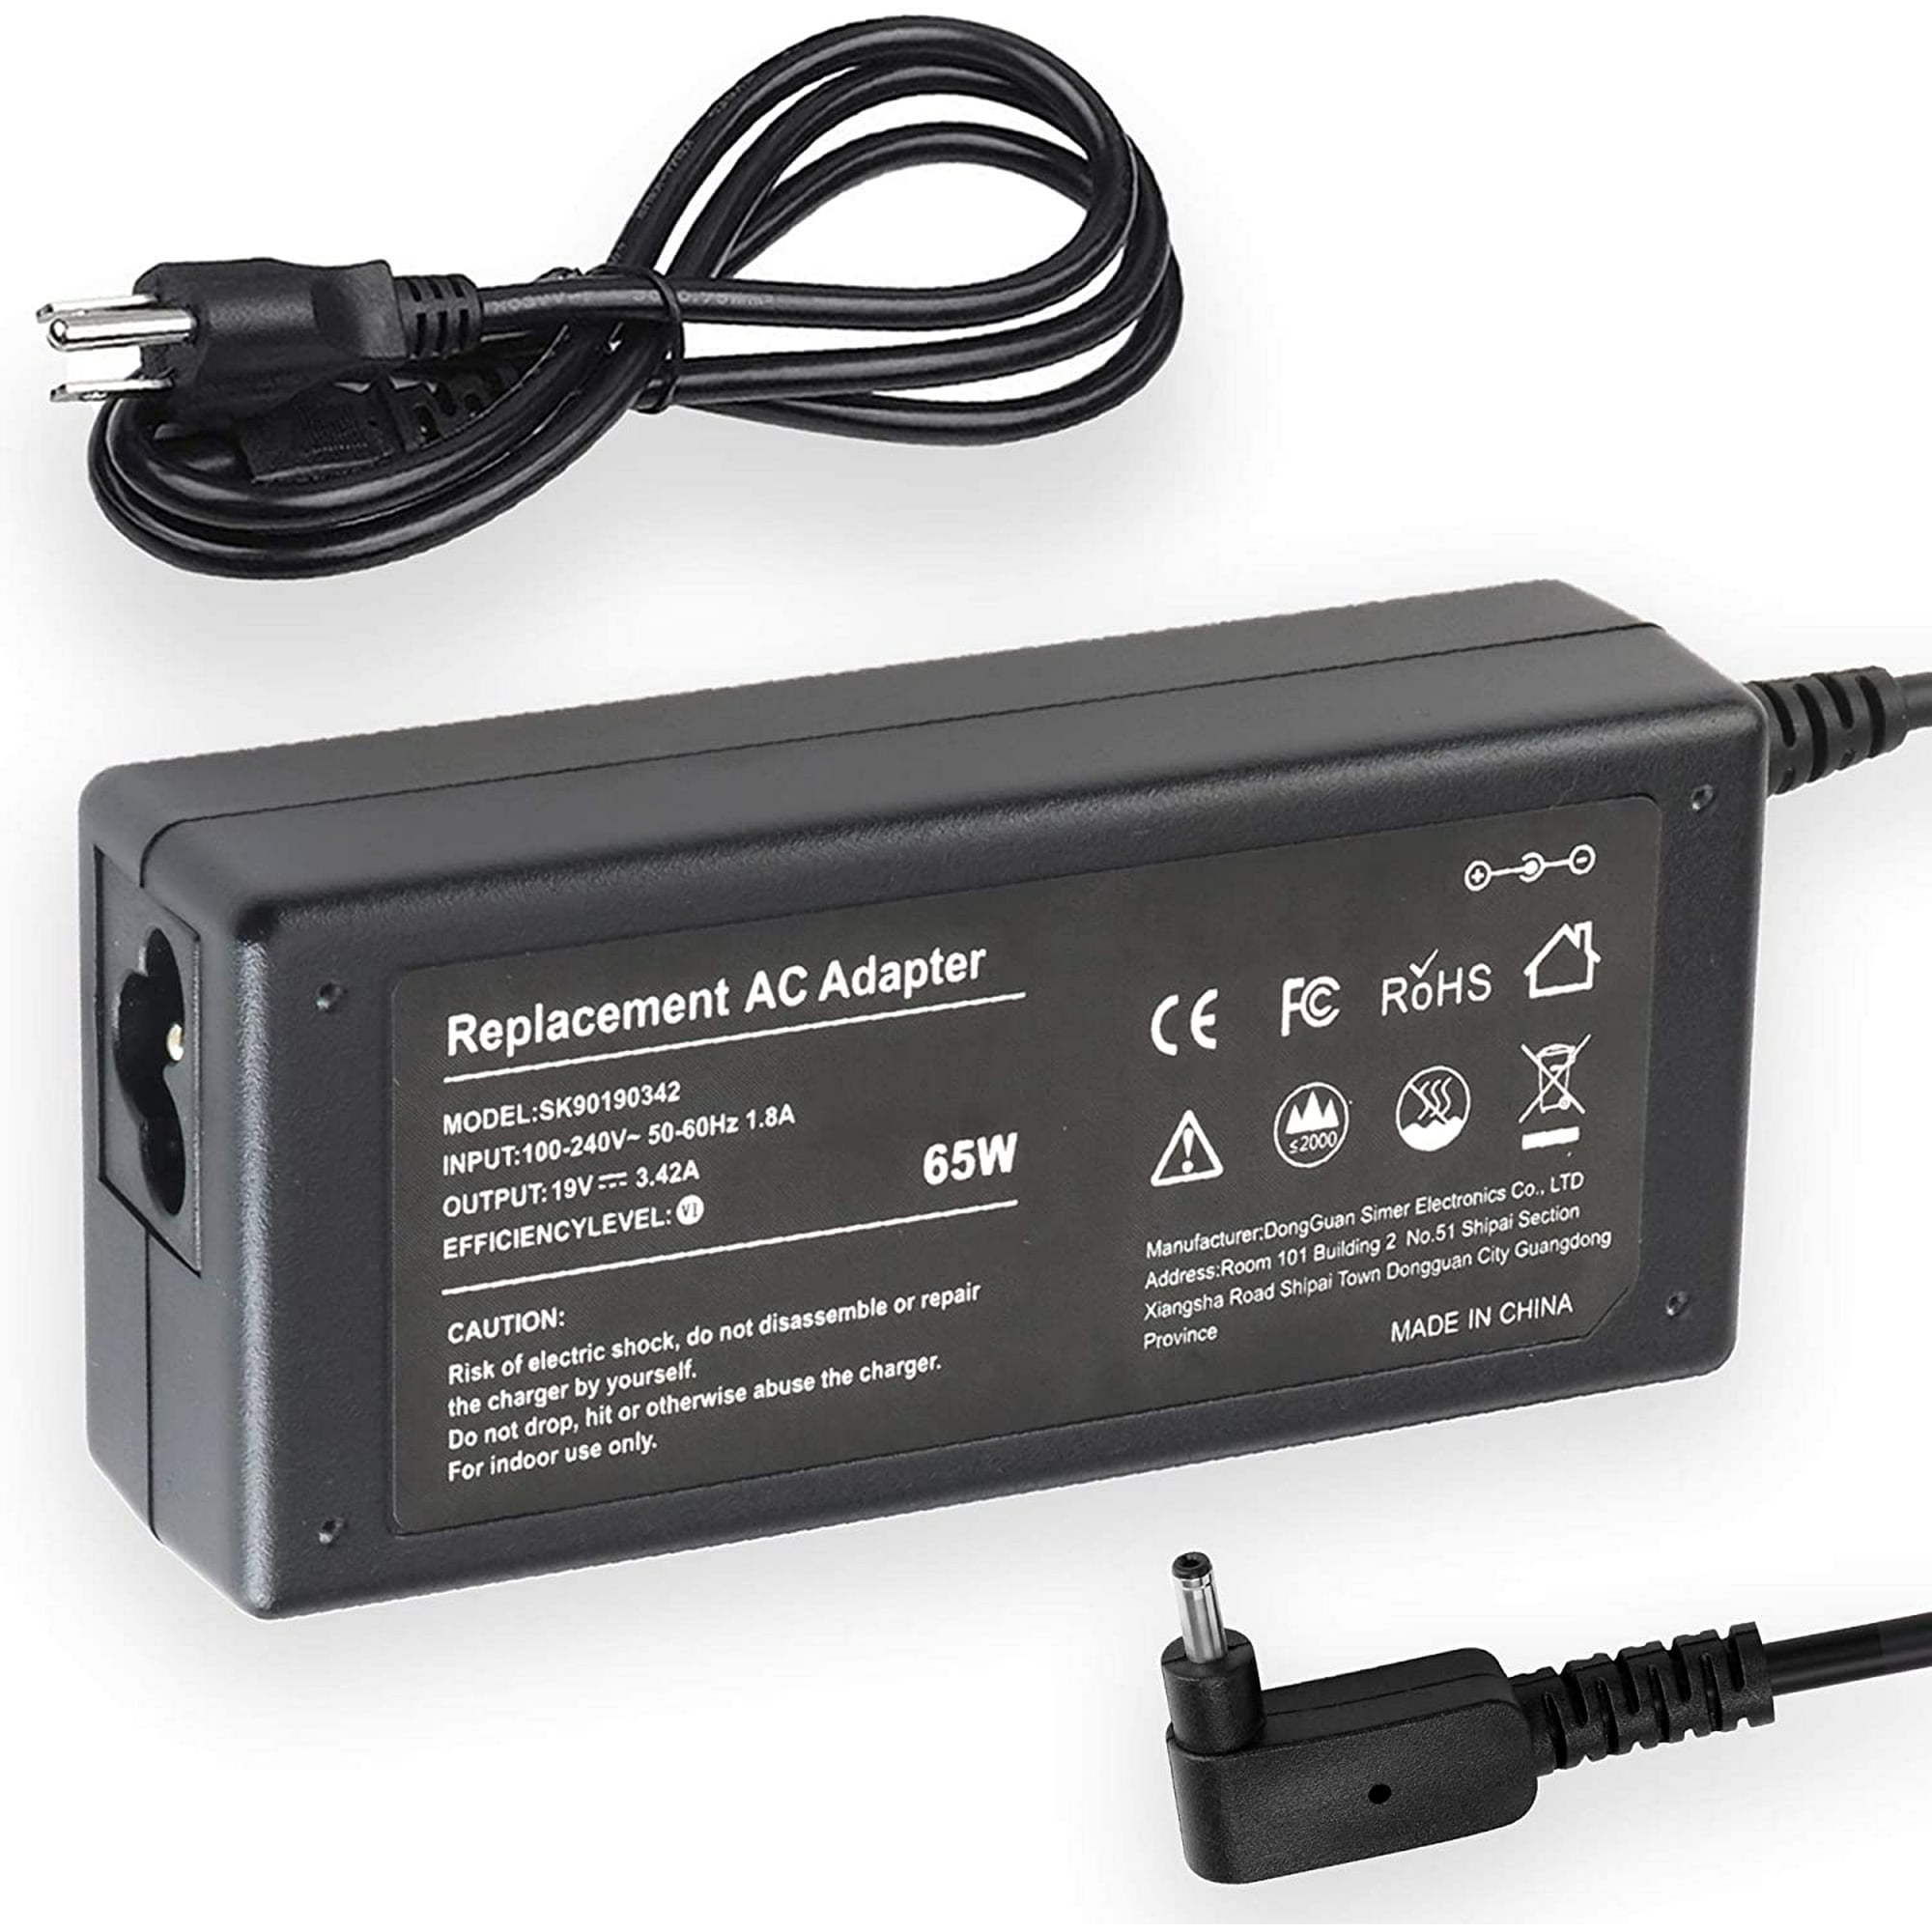 Replacement AC Adapter Charger for Chromebook (not Plug tip) - Walmart.com